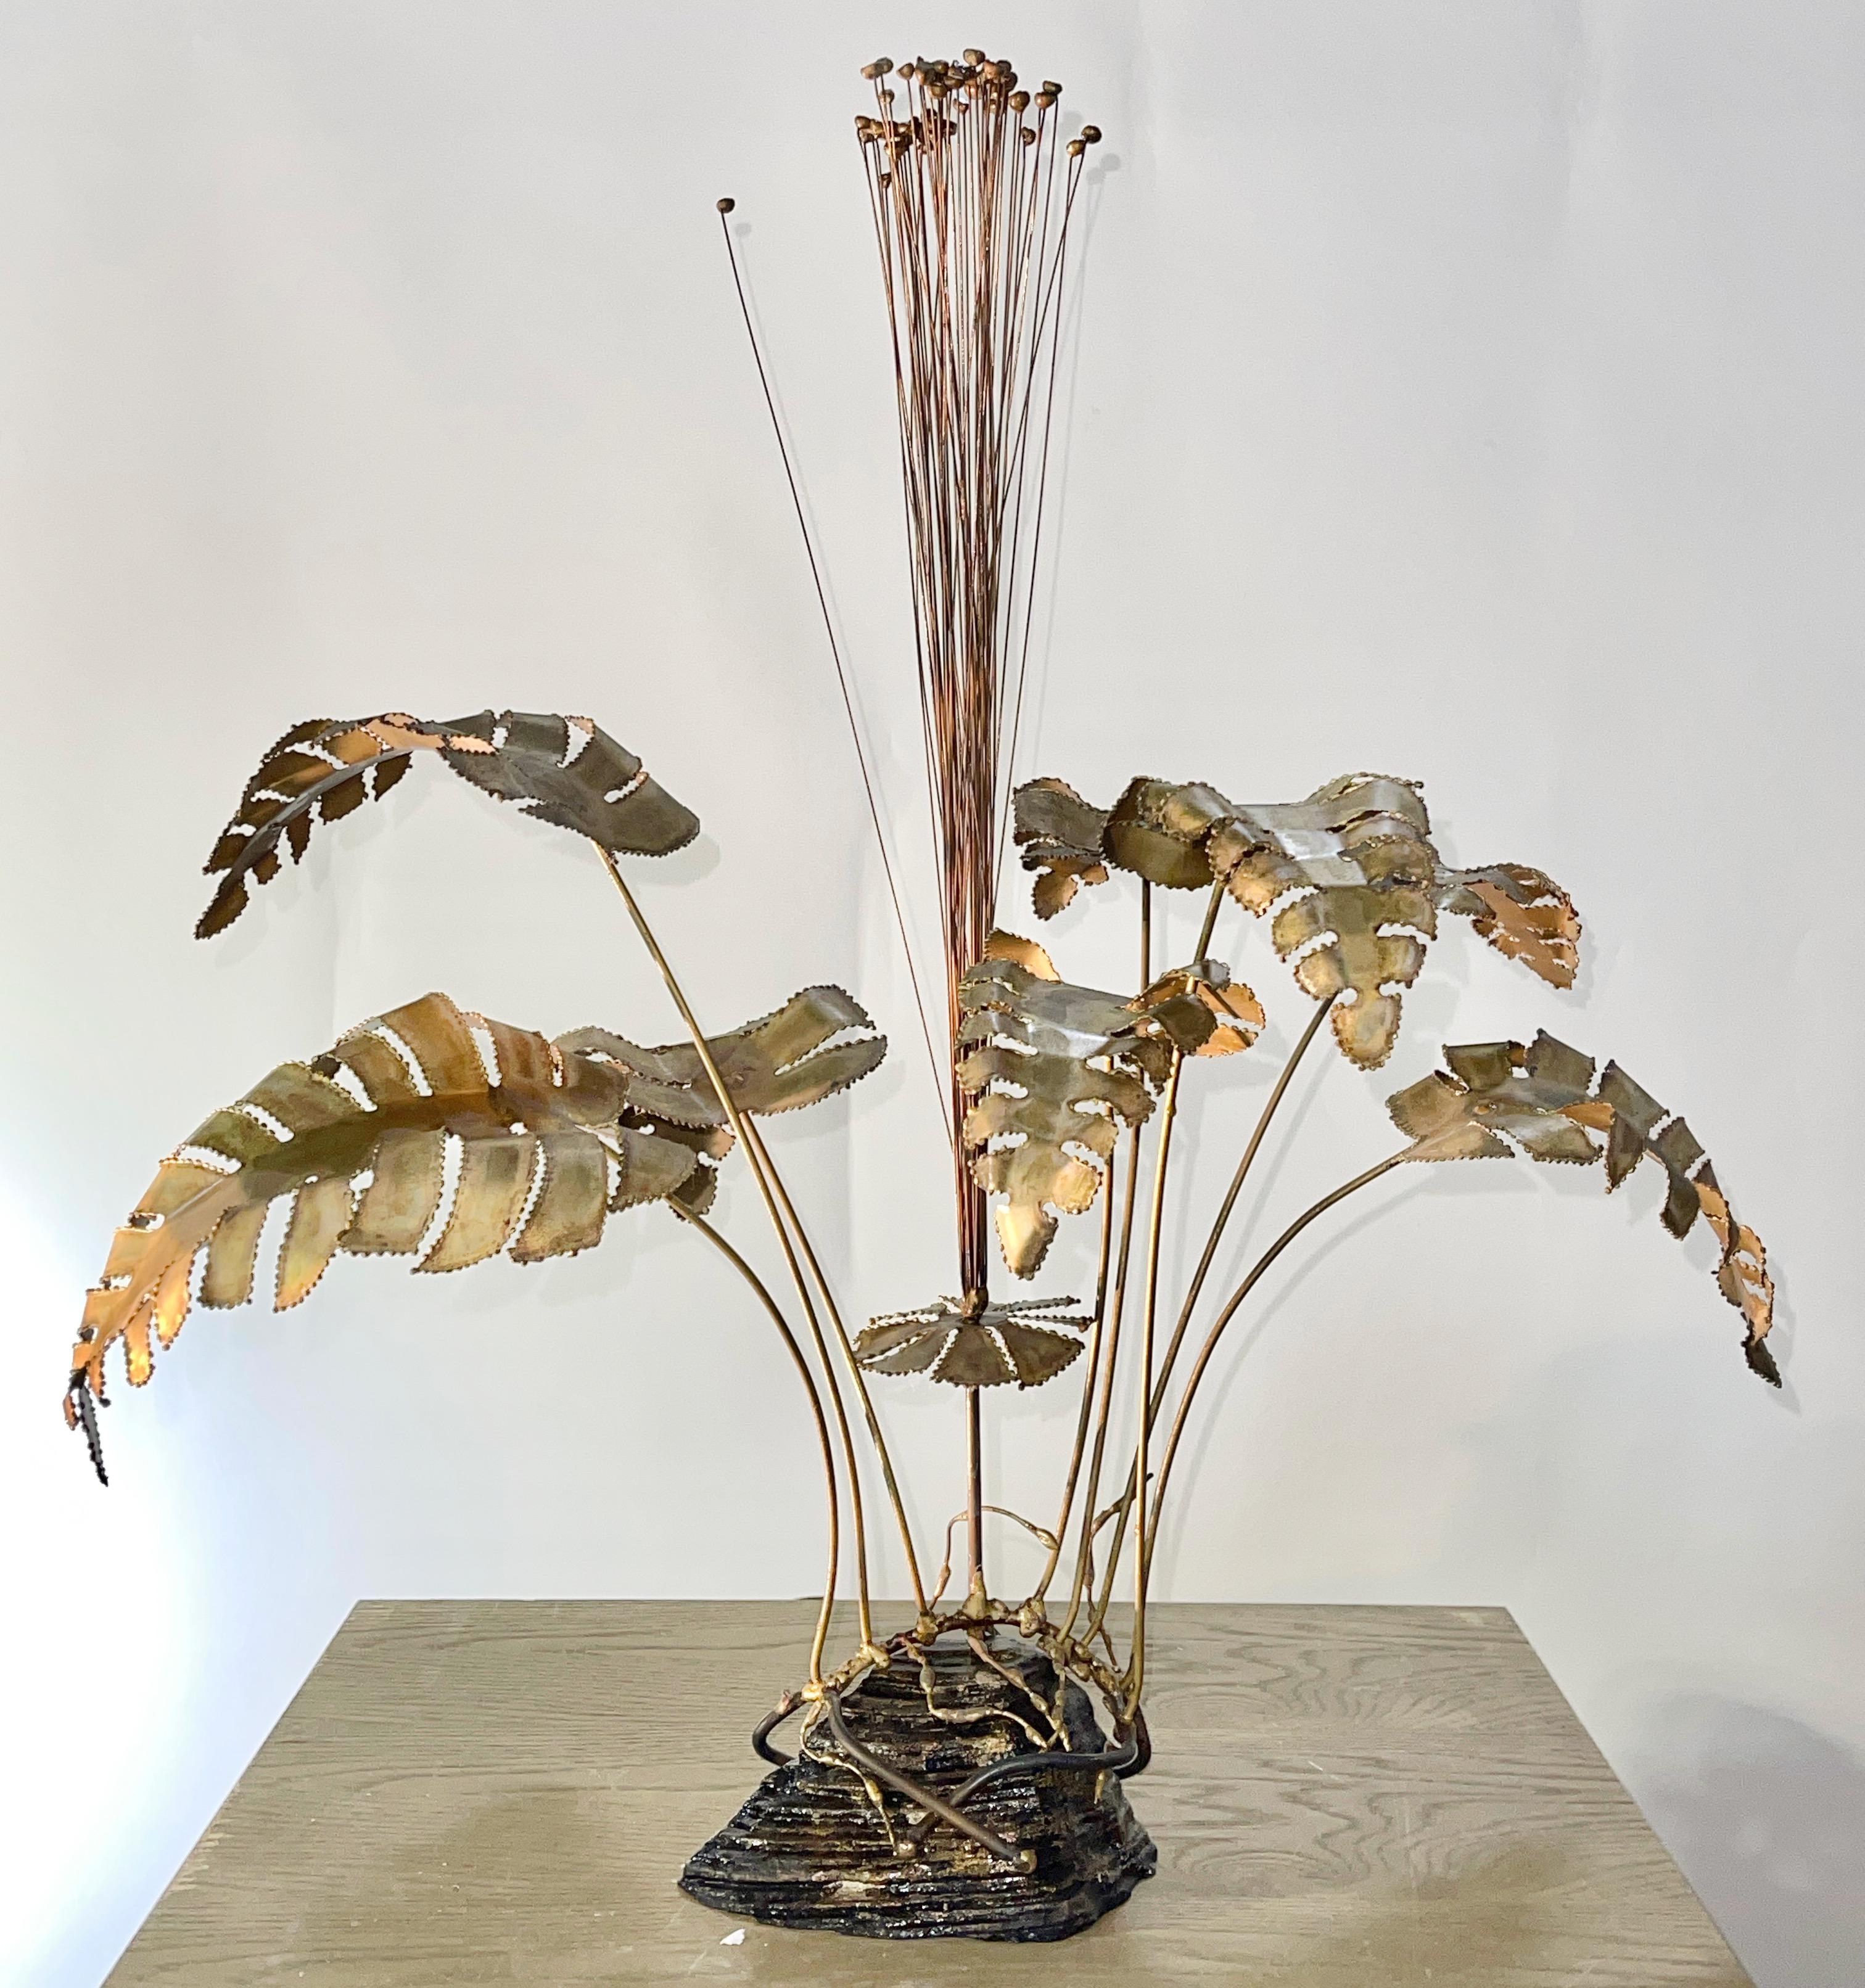 Torch cut brass and mixed metal kinetic floral spray in the style of Curtis Jere retailed through Brotman's Village Fair in Sausalito, CA circa 1970